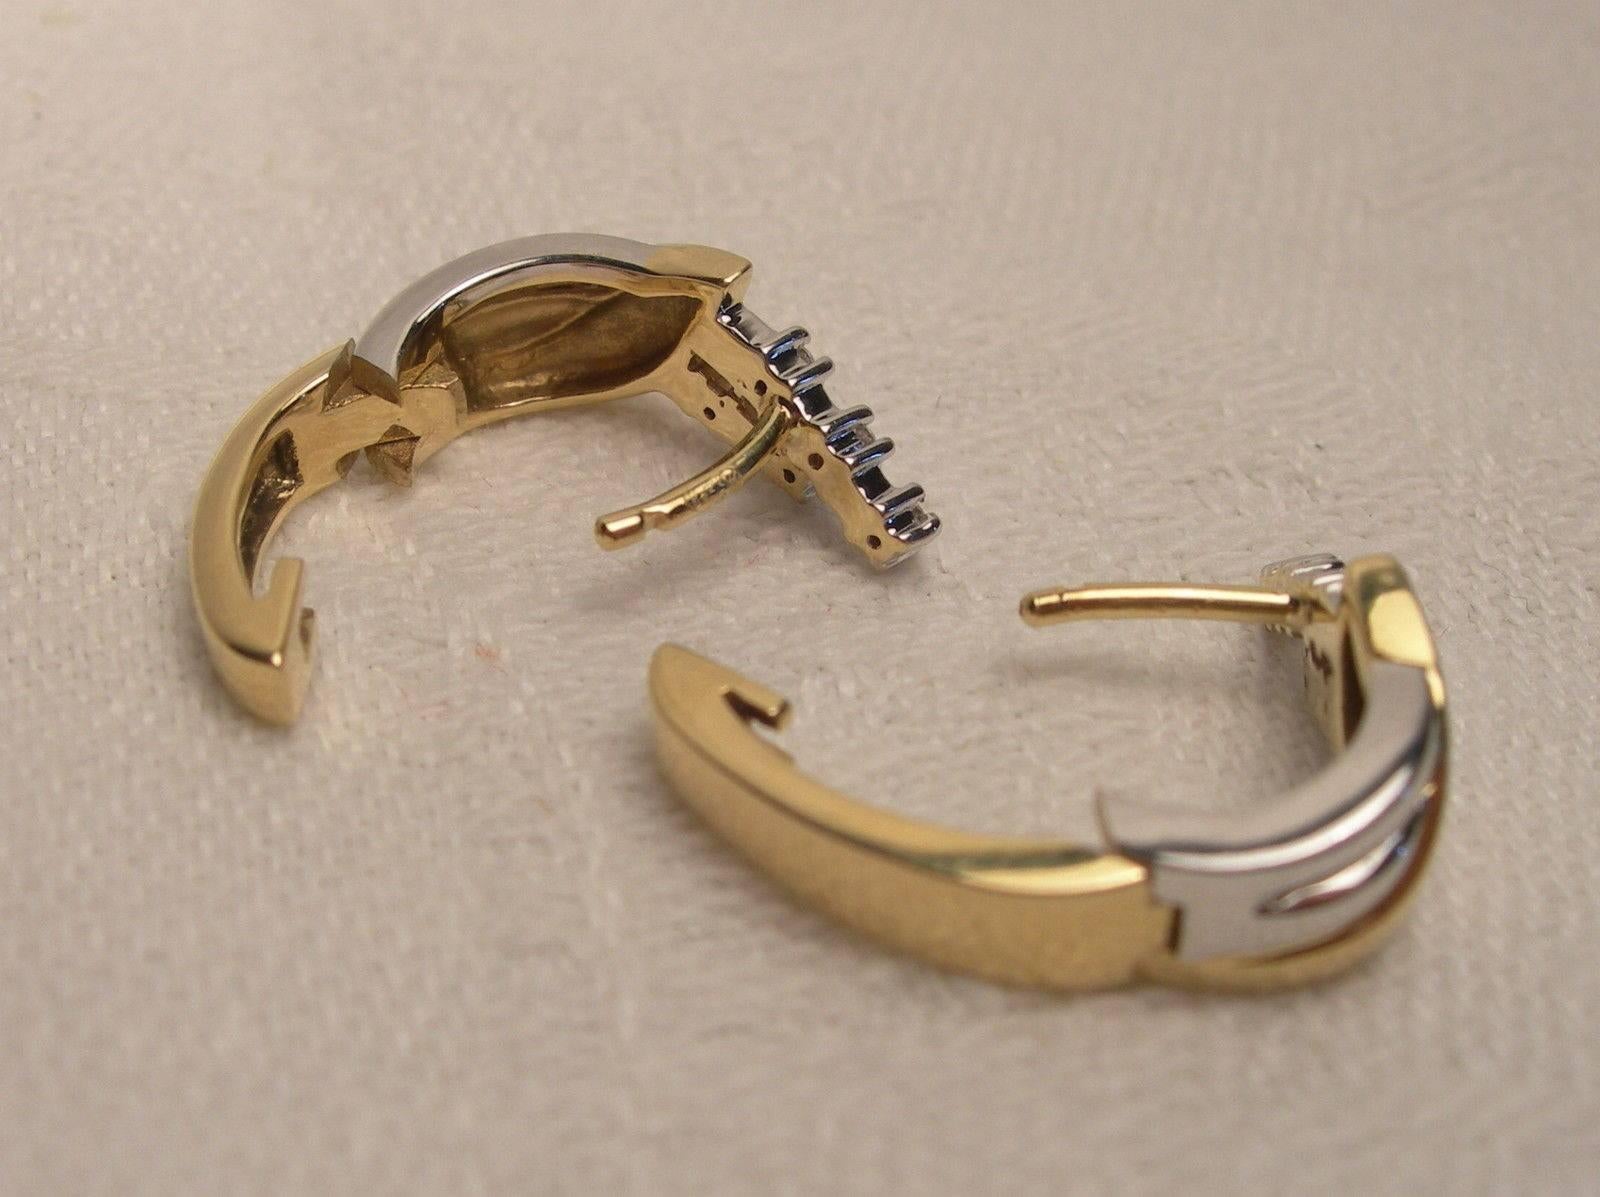 Nice pair of vintage 18-karats yellow and white gold earrings.
Each is decorated with two rows of five small diamonds (1.3 mm).
On the back an hinge clips onto the rod passing though the ear.
Jewelry is in very good conditions.

Total diamond